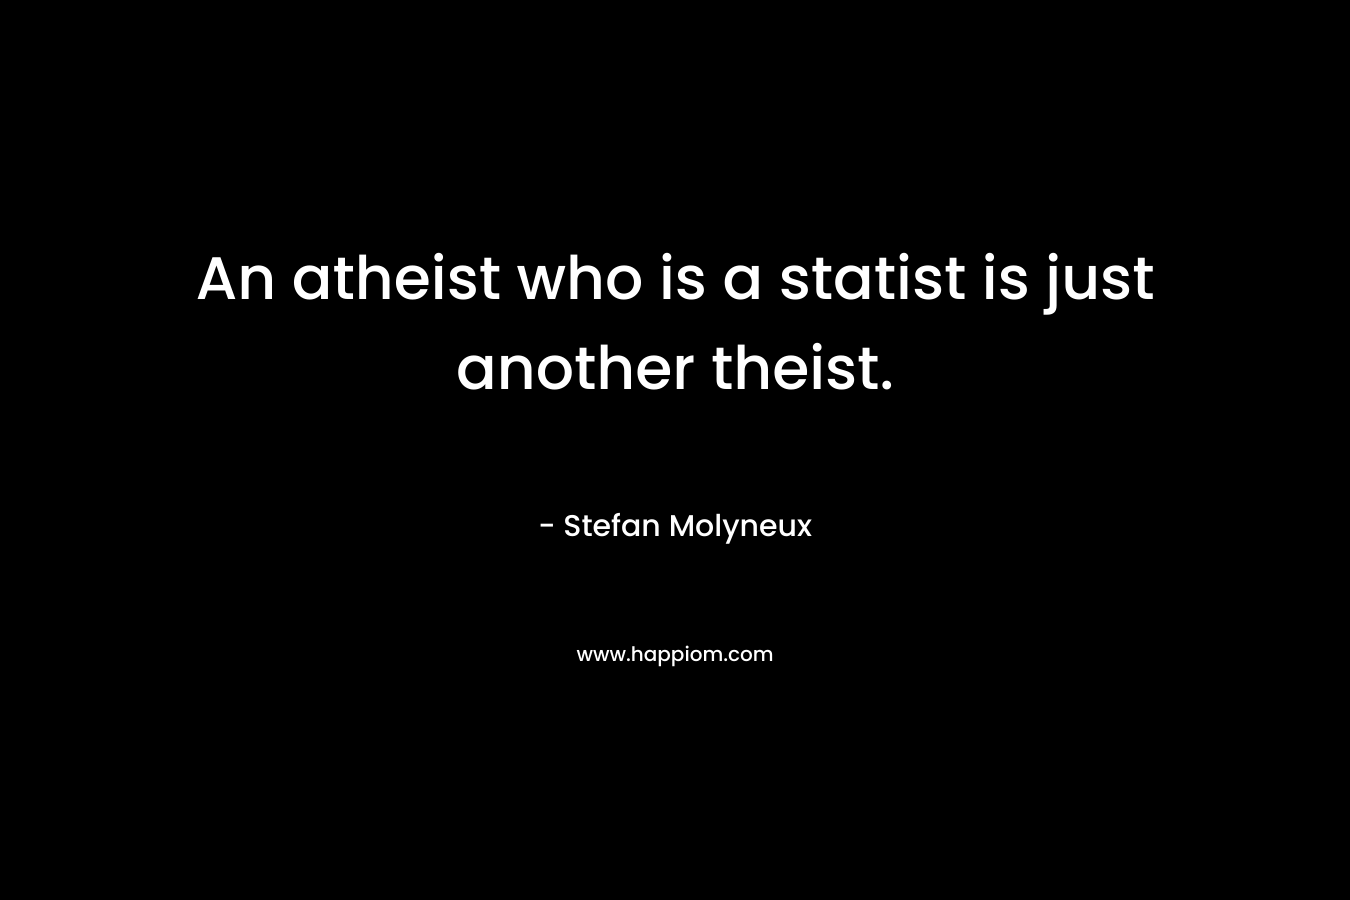 An atheist who is a statist is just another theist.